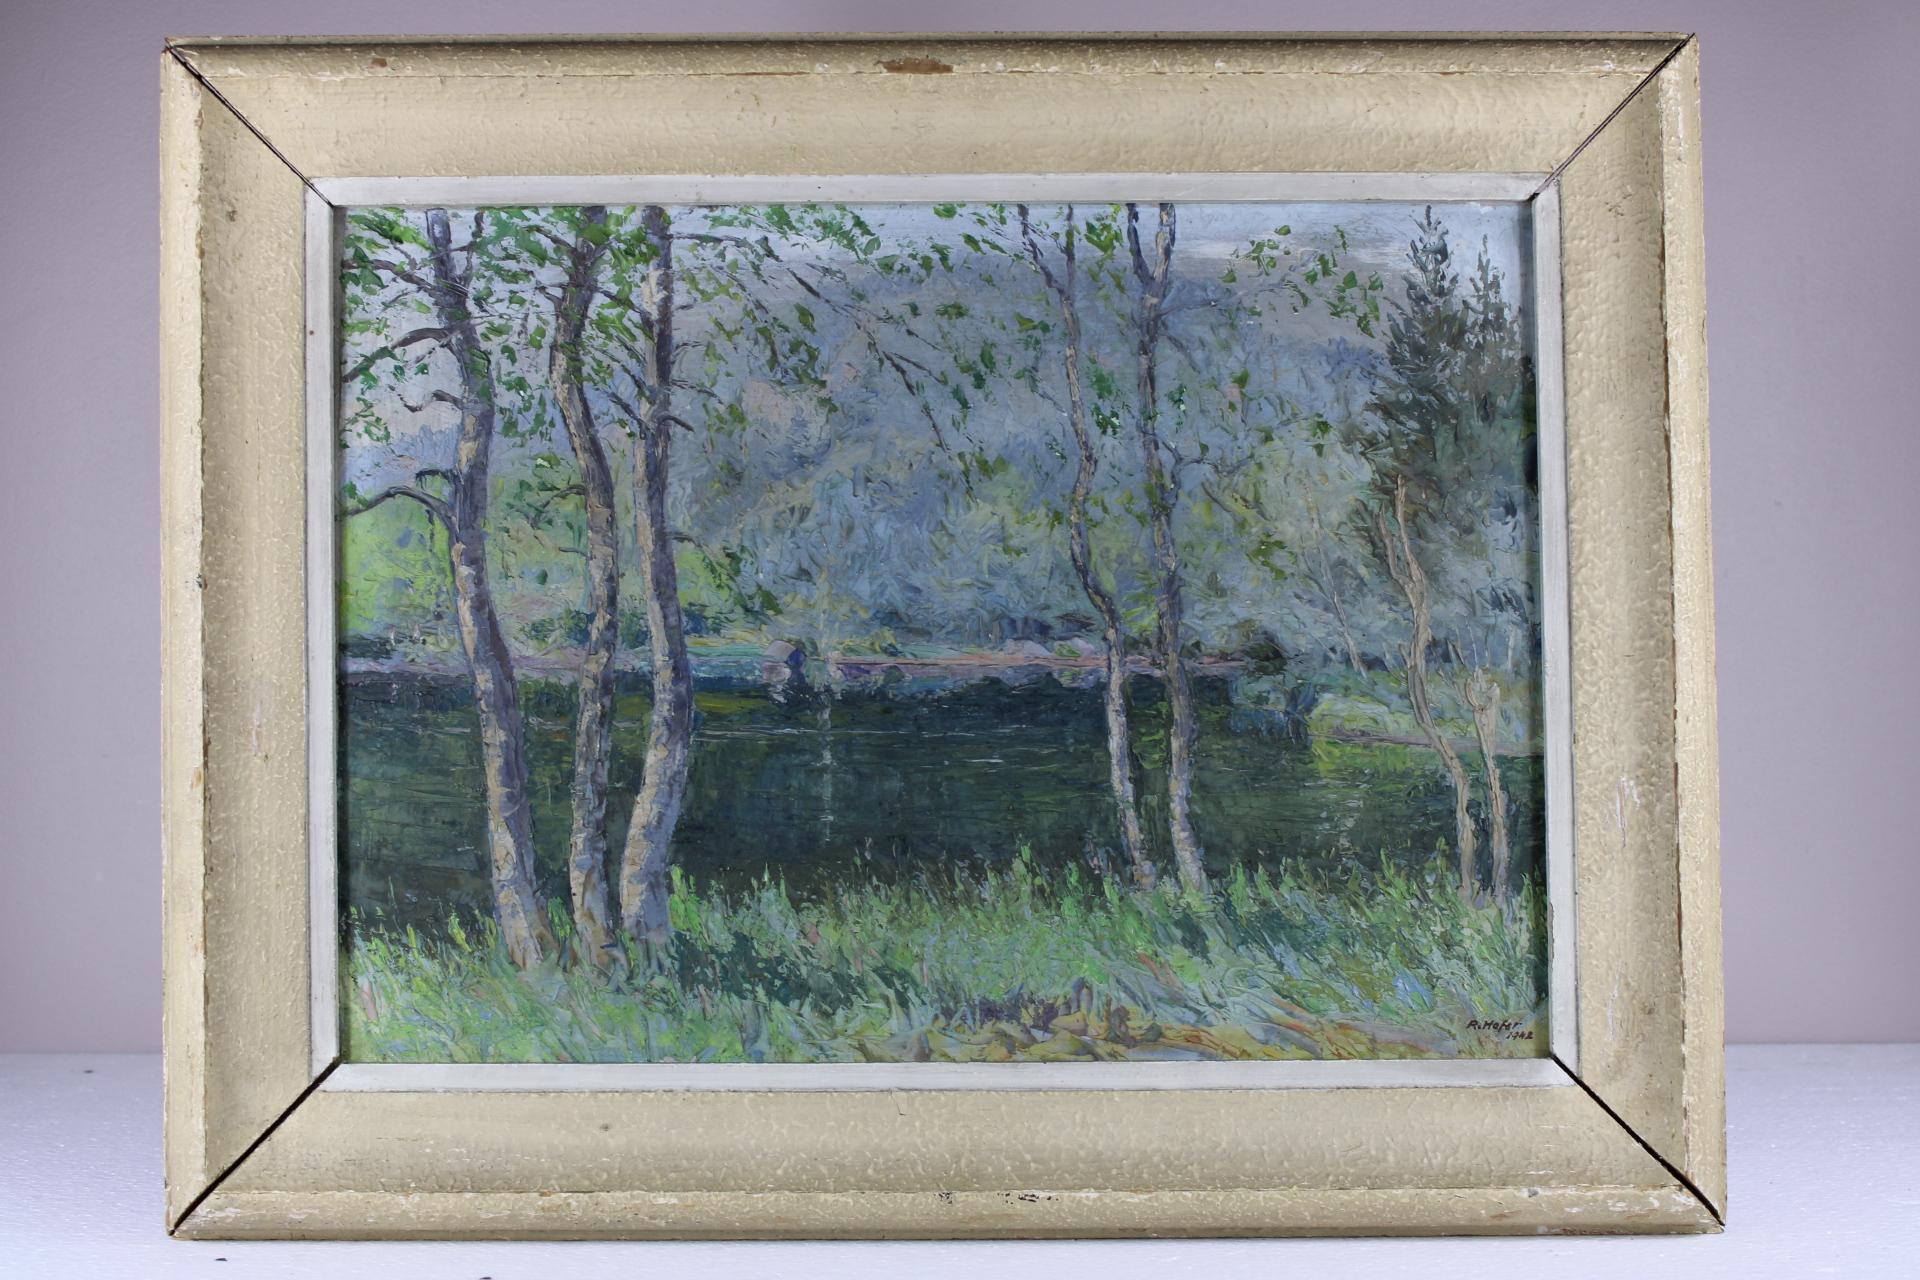 Countryside of France, Original Oil on cardboard, Impressionist style, signed - Painting by Robert Hofer